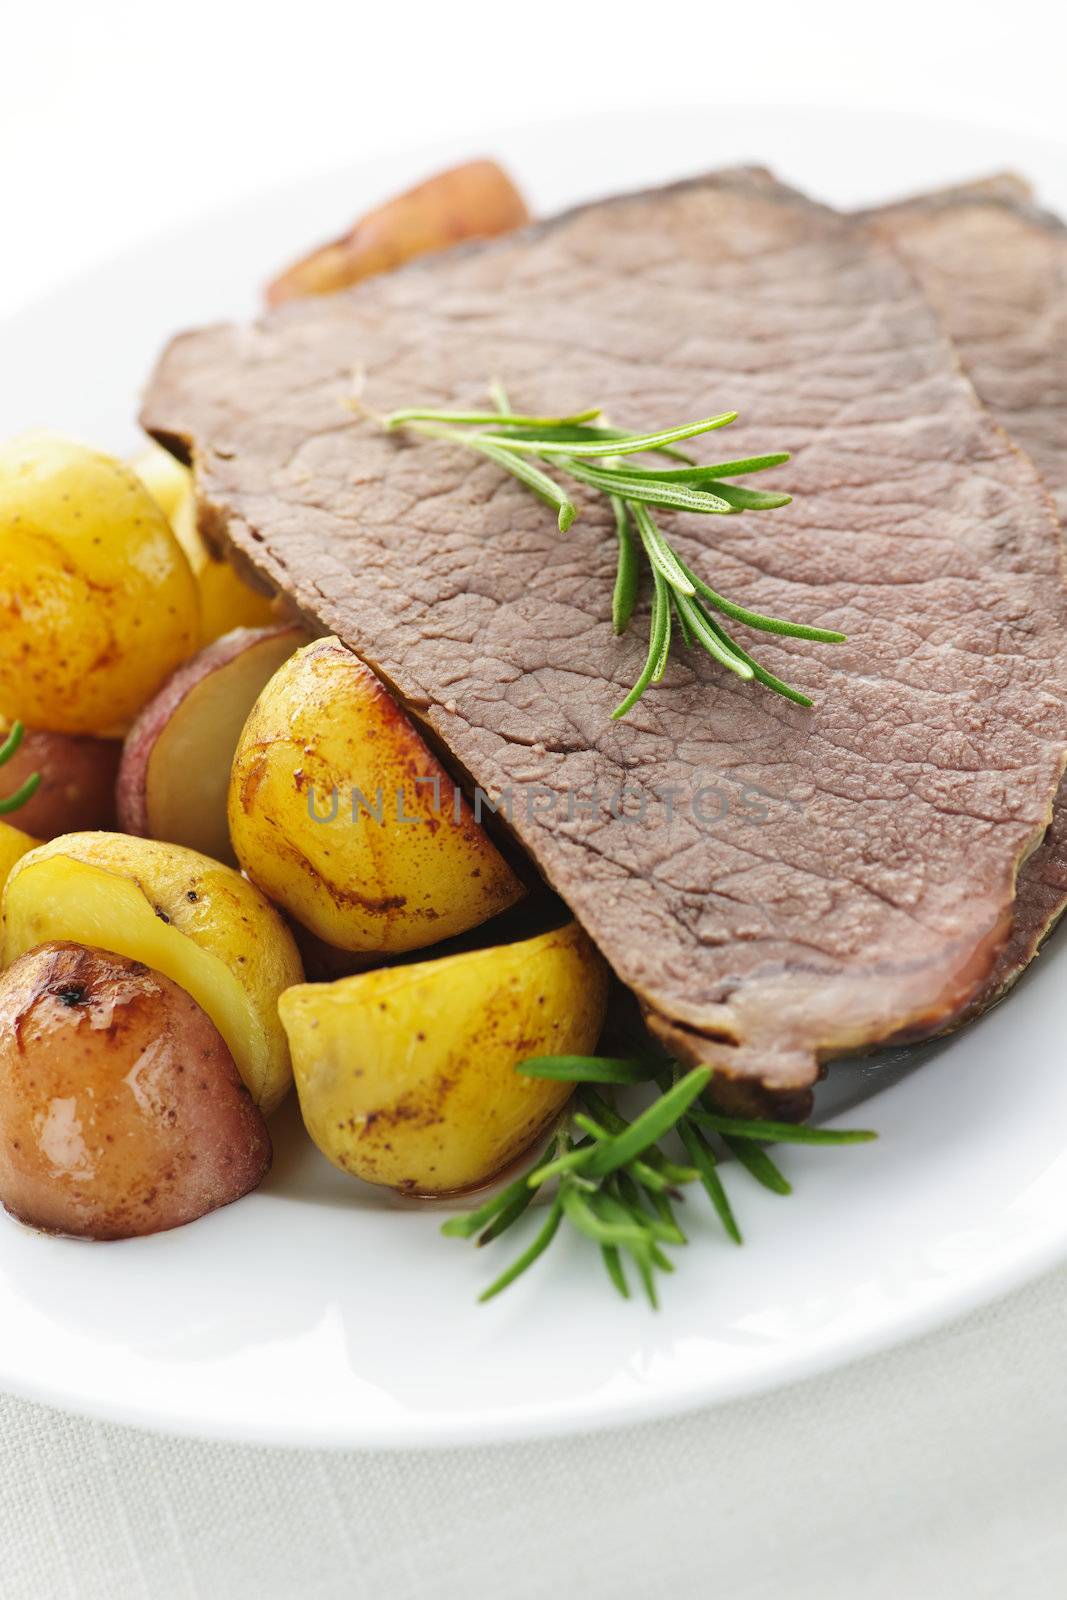 Roast beef and potatoes by elenathewise